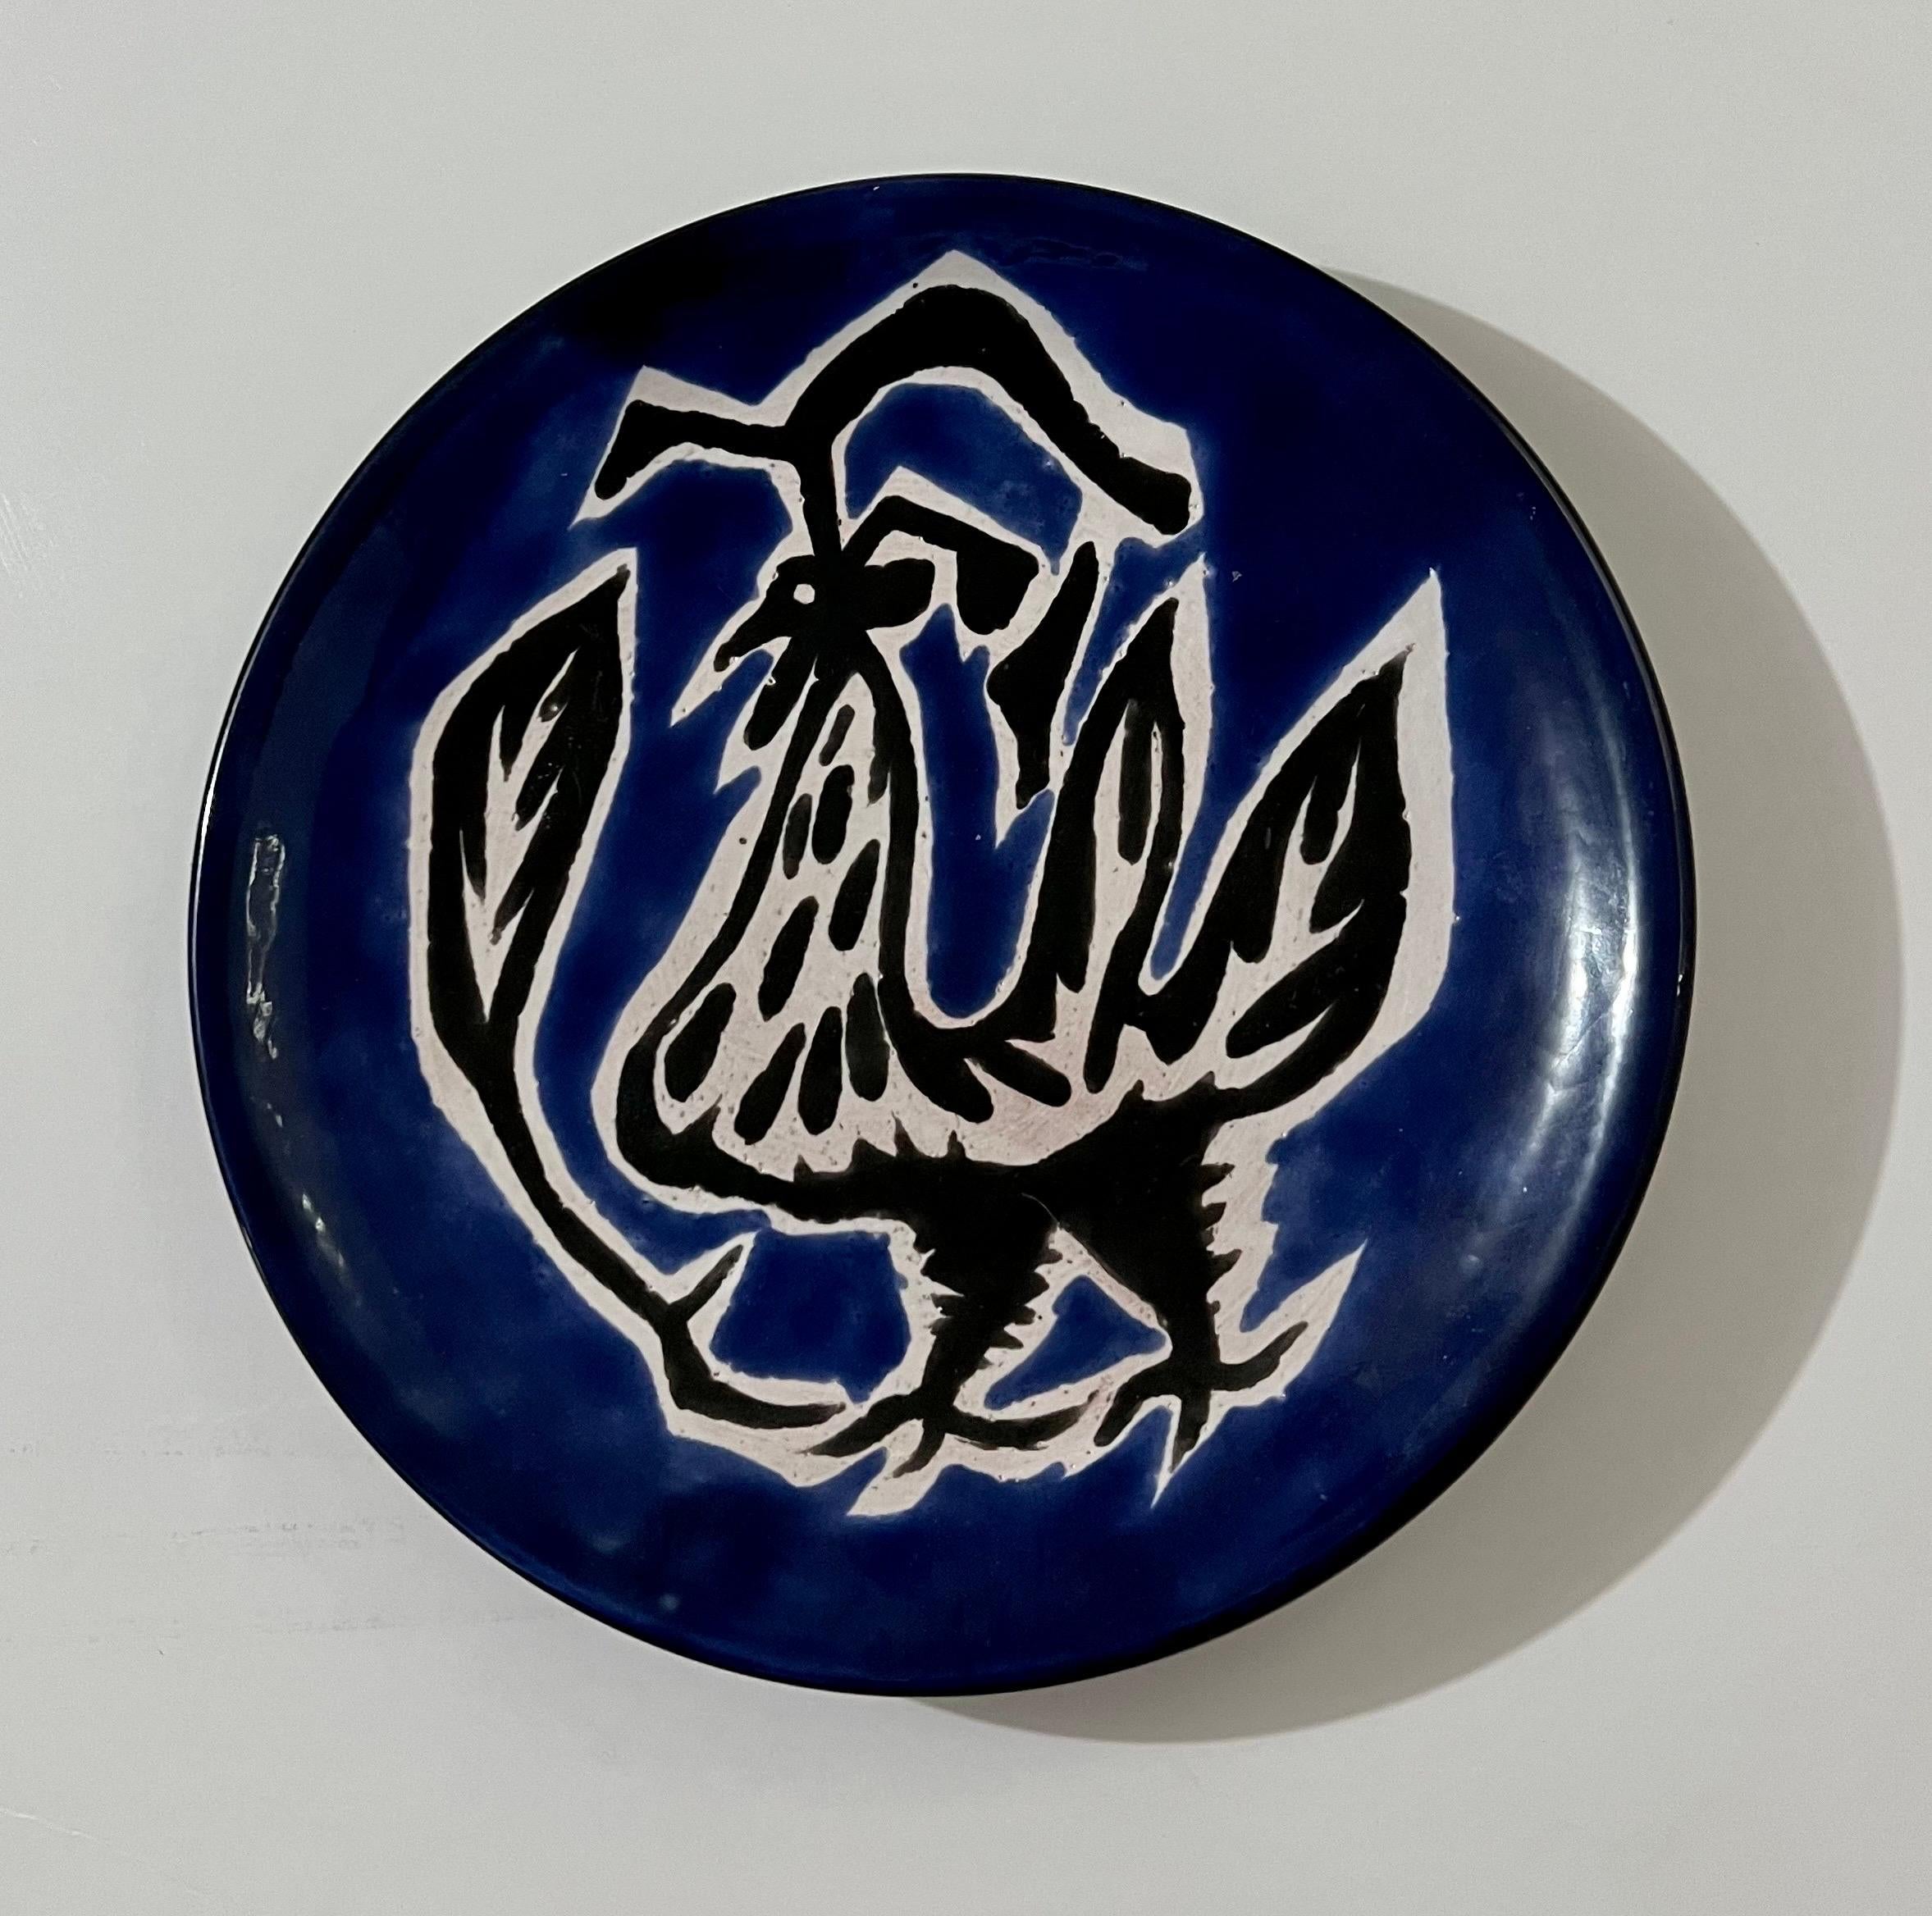 Vintage Jean Lurcat glazed fired enamel wall plaque ceramic plate limited edition hand inscribed faience Ceramique Saint Vicens charger.  It depicts a highly stylized rooster, le coq, in bright, vibrant cobalt blue colors.
Jean Lurçat (French: 1892